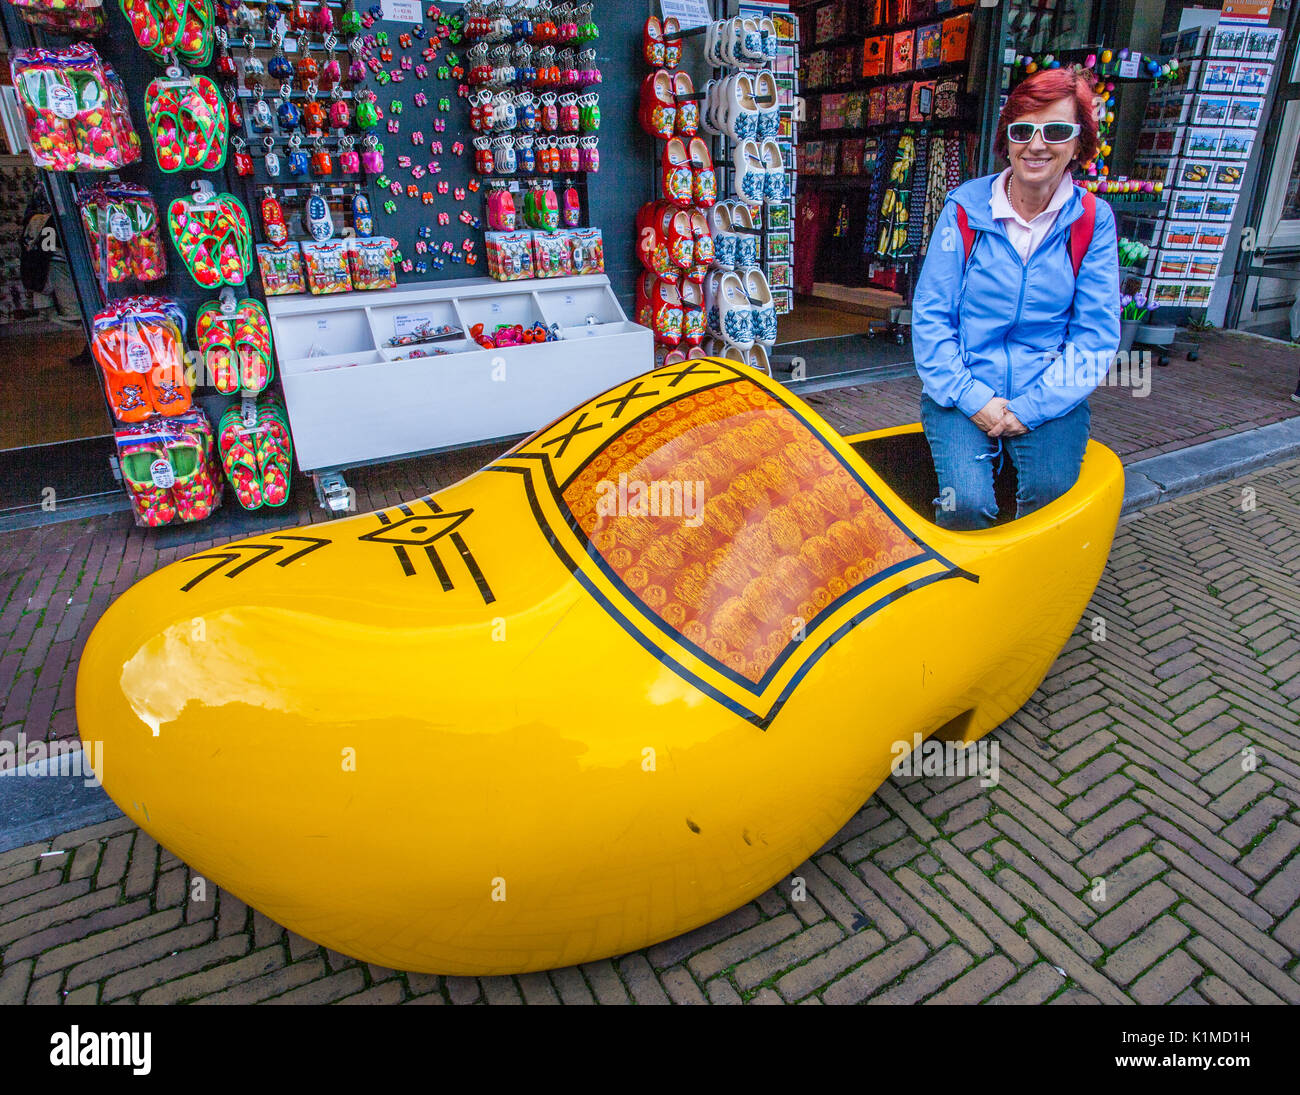 Netherlands, South Holland, Delft, oversized traditional all-wooden Dutch clog, refered to as klompen in dutch at Delft souvenir shop Stock Photo